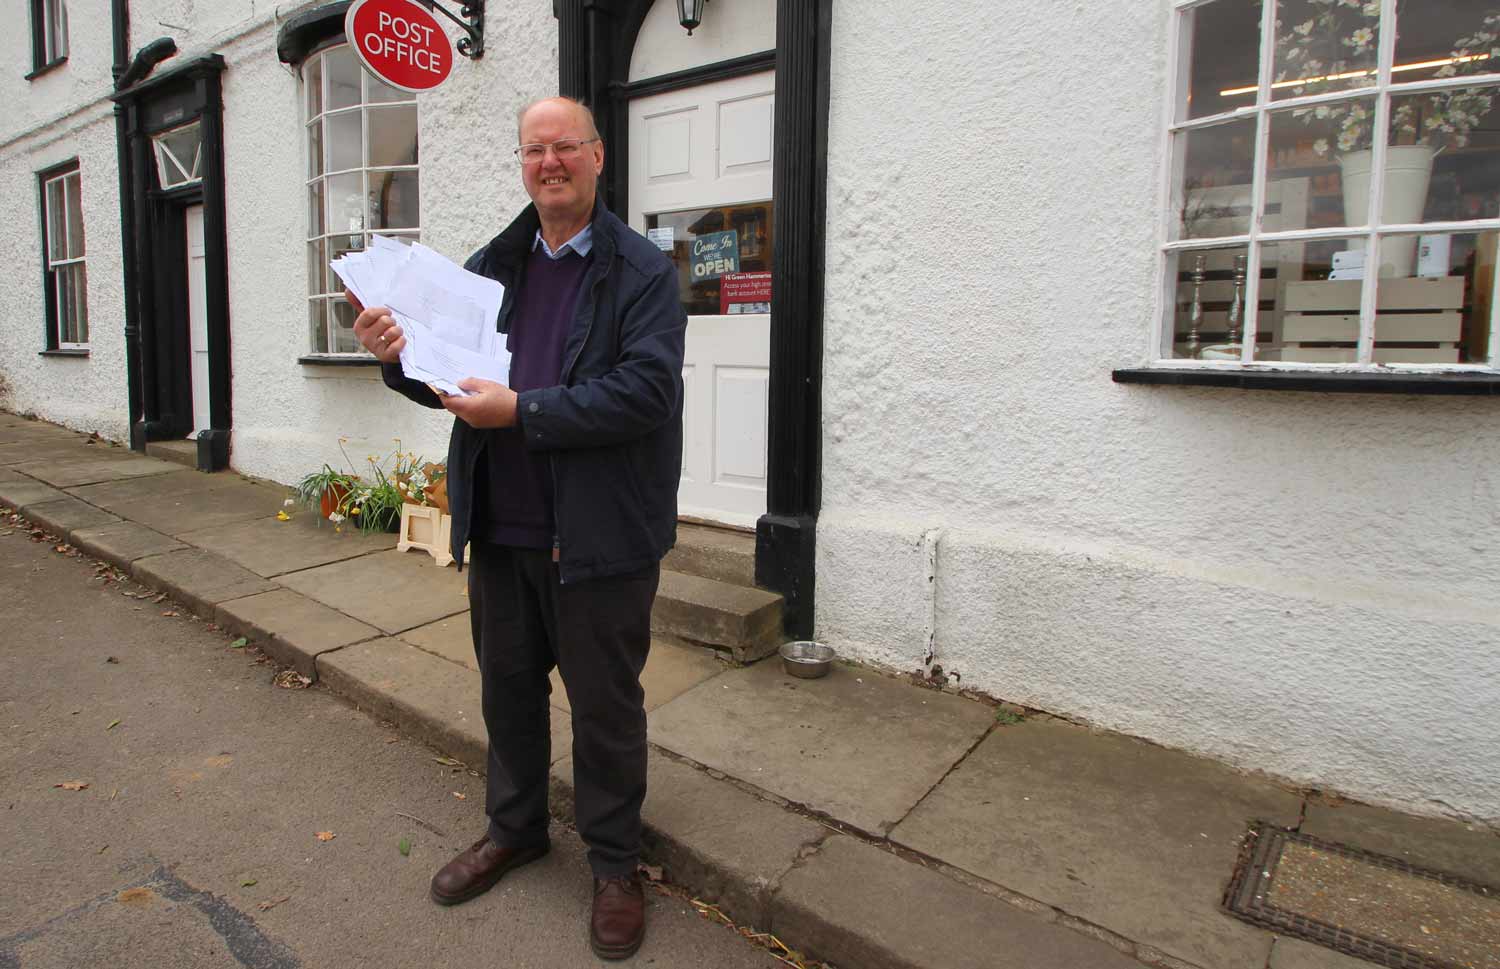 Alan Smith a member of the Keep Green Hammerton Green Action Group who delivered the letters to the Council offices